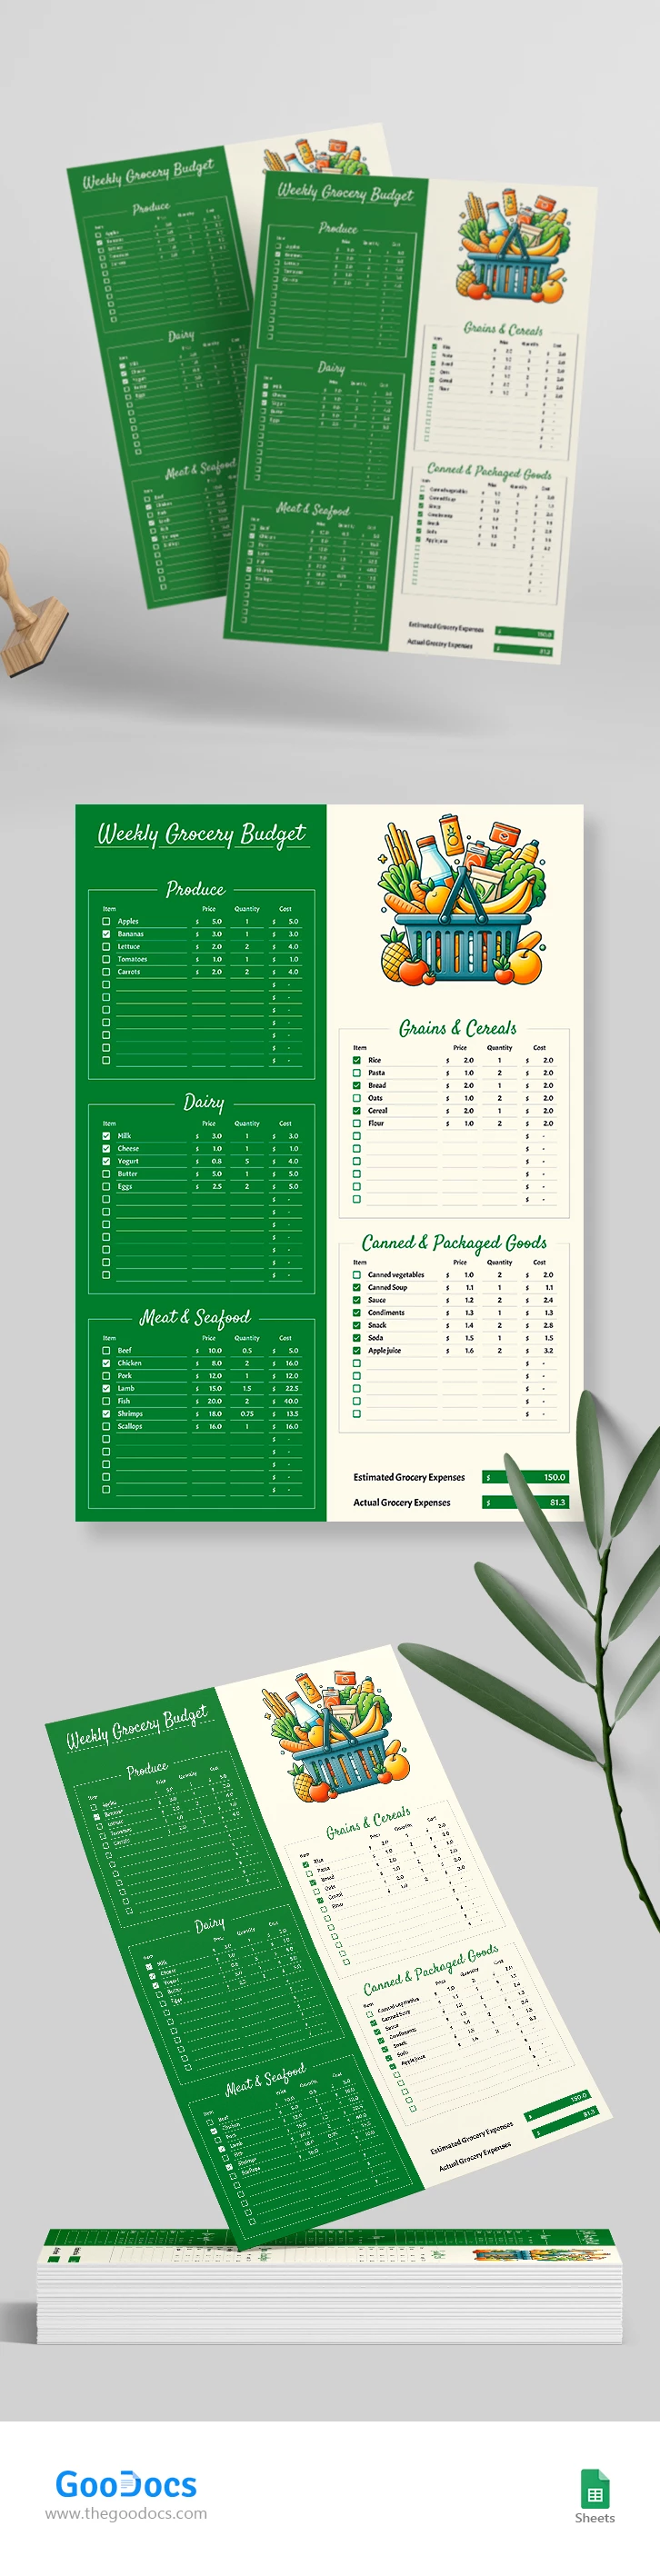 Weekly Grocery Budget - free Google Docs Template - 10068455